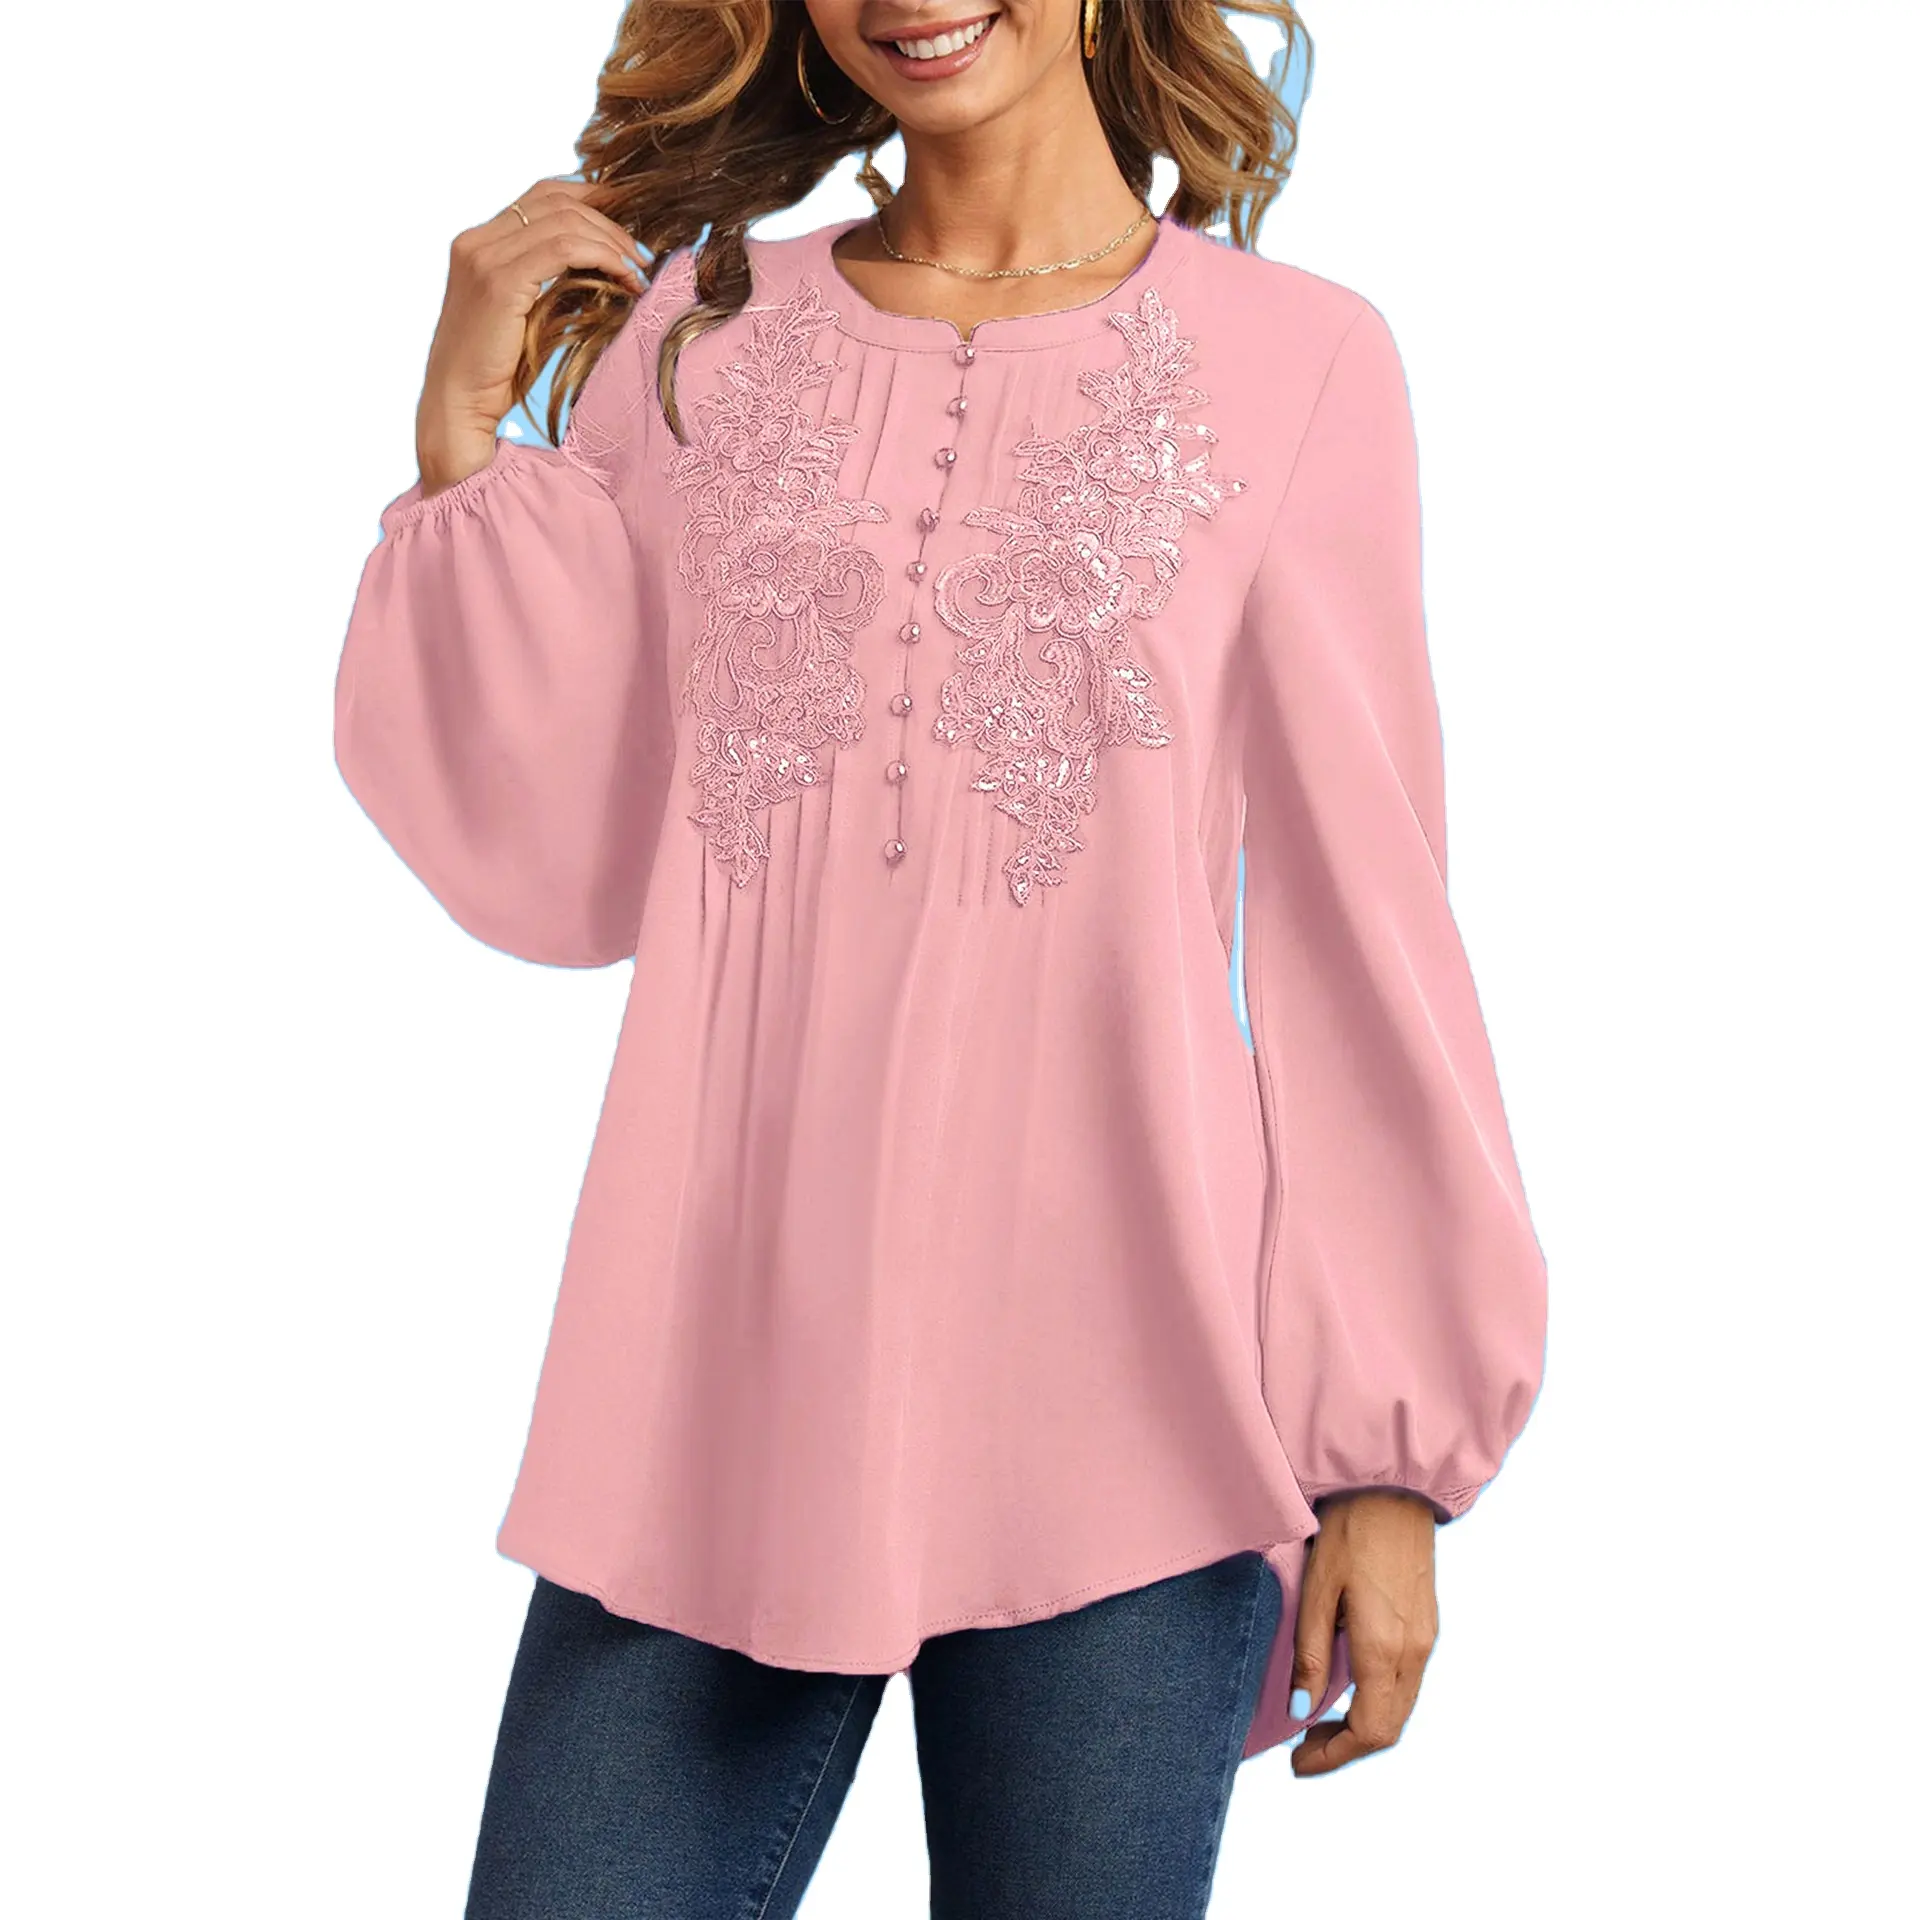 official long sleeve elegant women's blouses & shirts readymade ladies chiffon office blue pink long women's blouse and tops